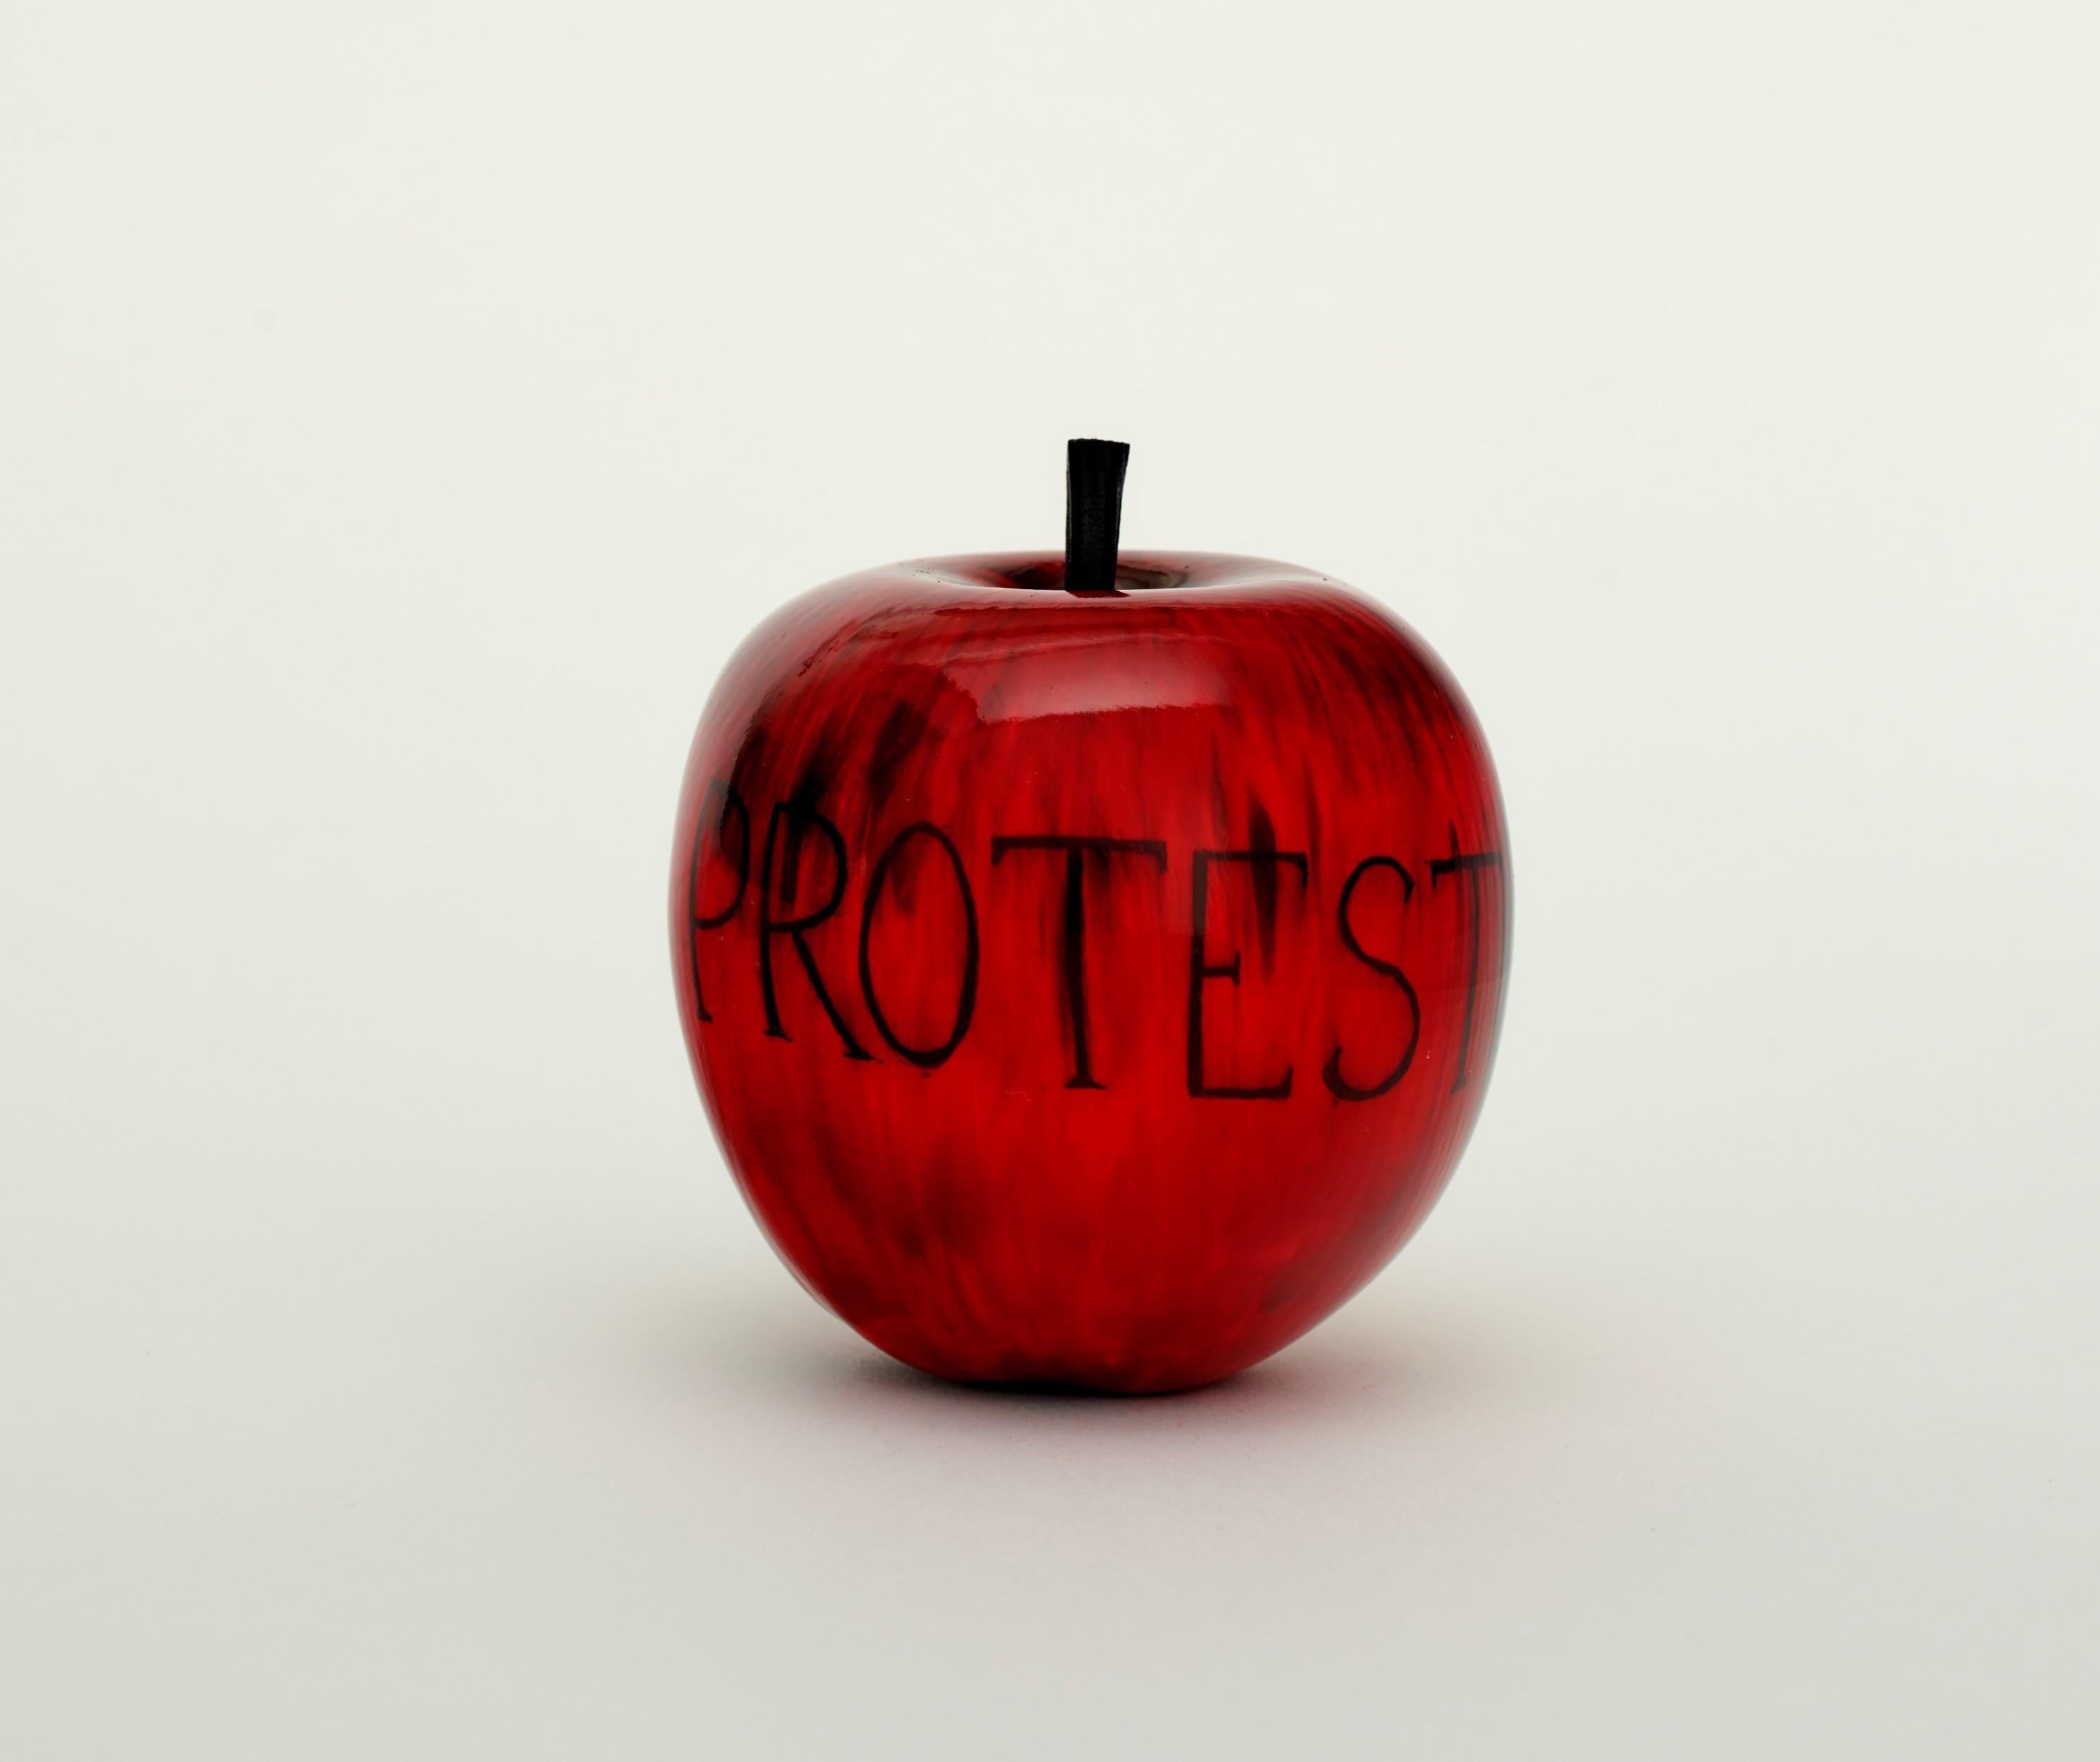 Barnaby Barford Figurative Sculpture - Protest (Apple)